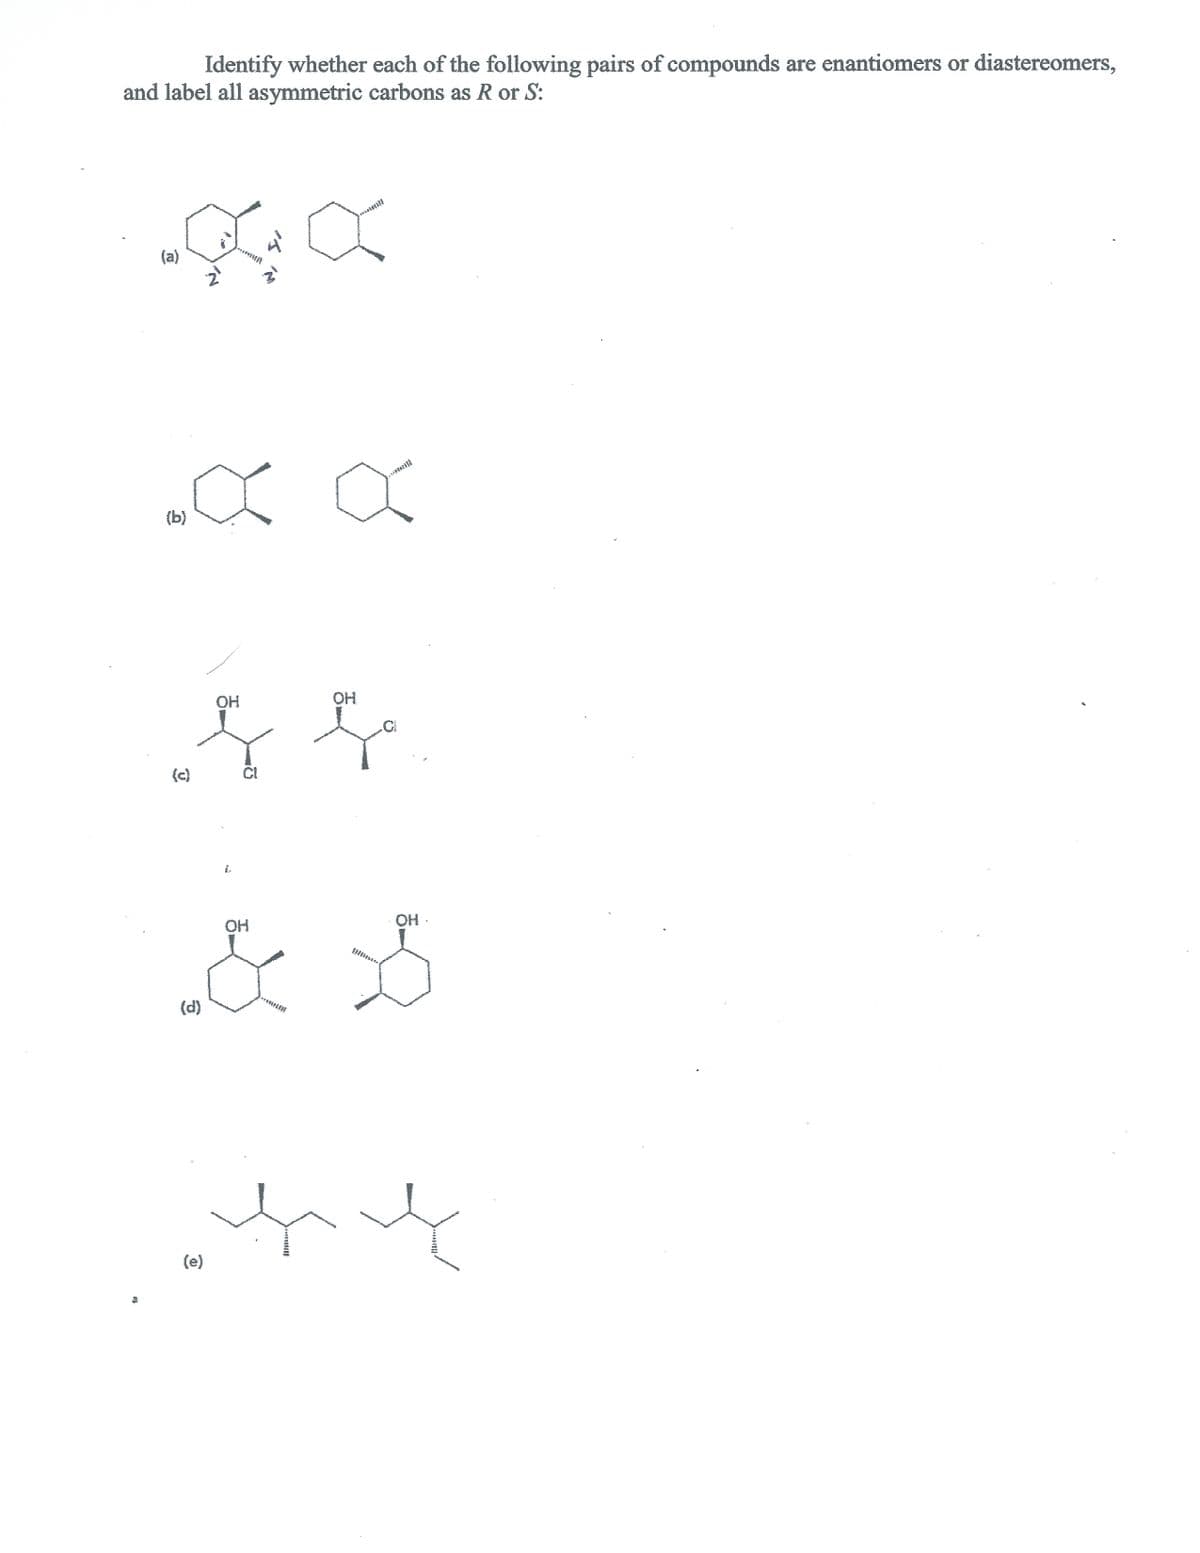 Identify whether each of the following pairs of compounds are enantiomers or diastereomers,
and label all asymmetric carbons as R or S:
(a)
(b)
HO
.CI
(c)
ČI
OH -
黃
(d)
(e)
********
